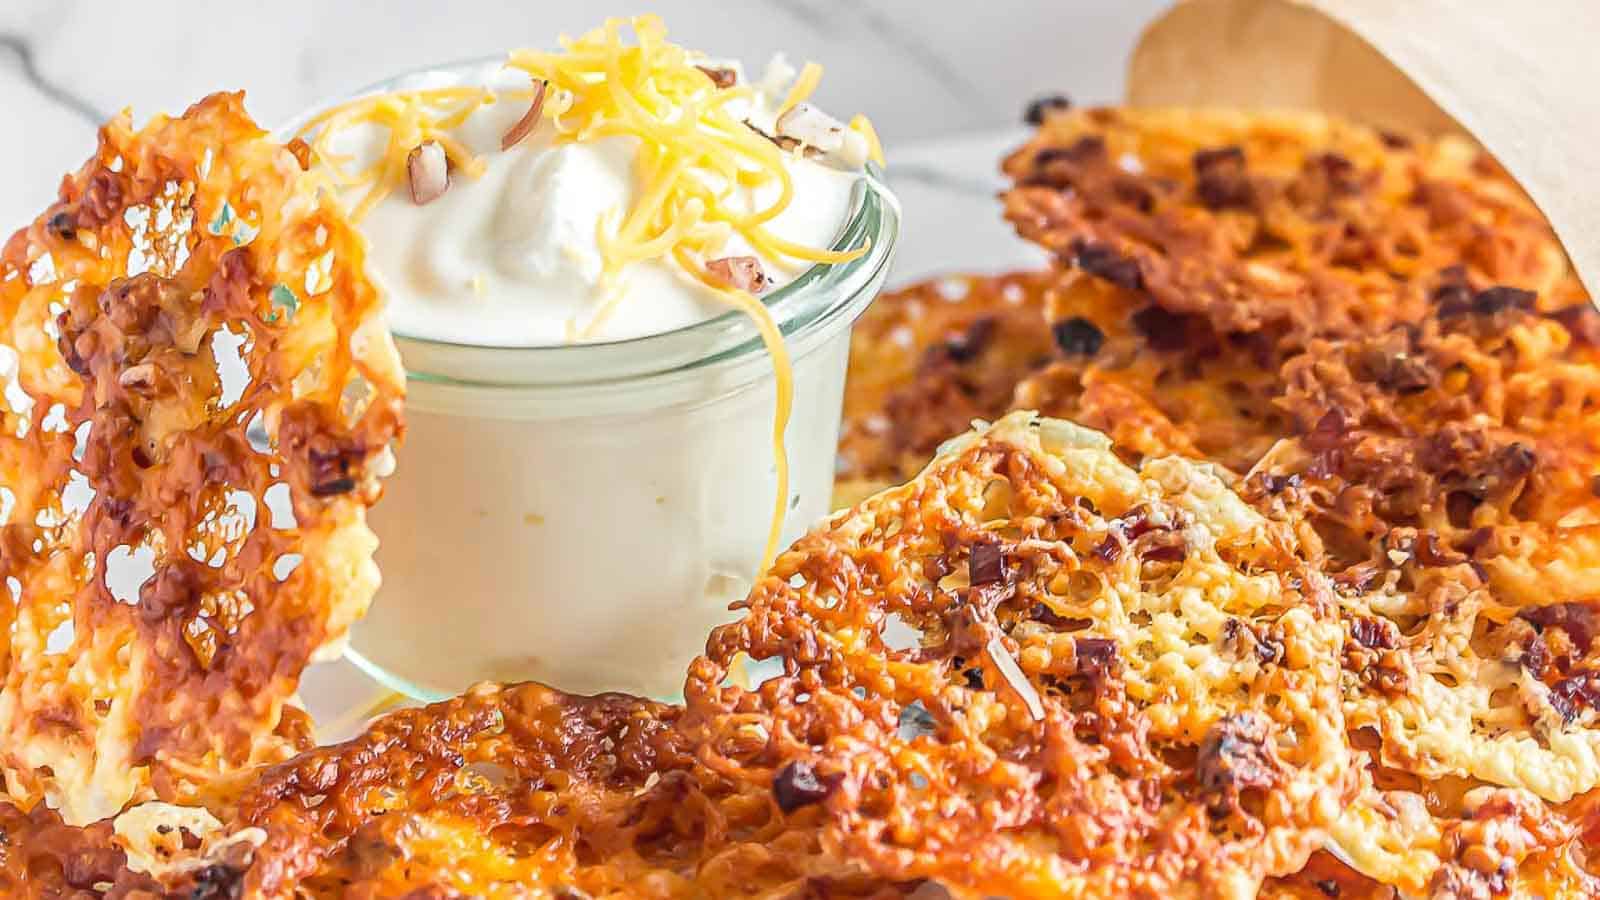 <p>Give in to your cheesy cravings with these crispy and irresistible cheese bacon chips. Indulge in the perfect combination of salty bacon and gooey melted cheese that will leave you craving for more. Snack time just got a whole lot more exciting!<br><strong>Get the Recipe: </strong><a href="https://www.lowcarb-nocarb.com/keto-cheese-bacon-chips/?utm_source=msn&utm_medium=page&utm_campaign=msn">Cheesy Cravings Bacon Chips</a></p>